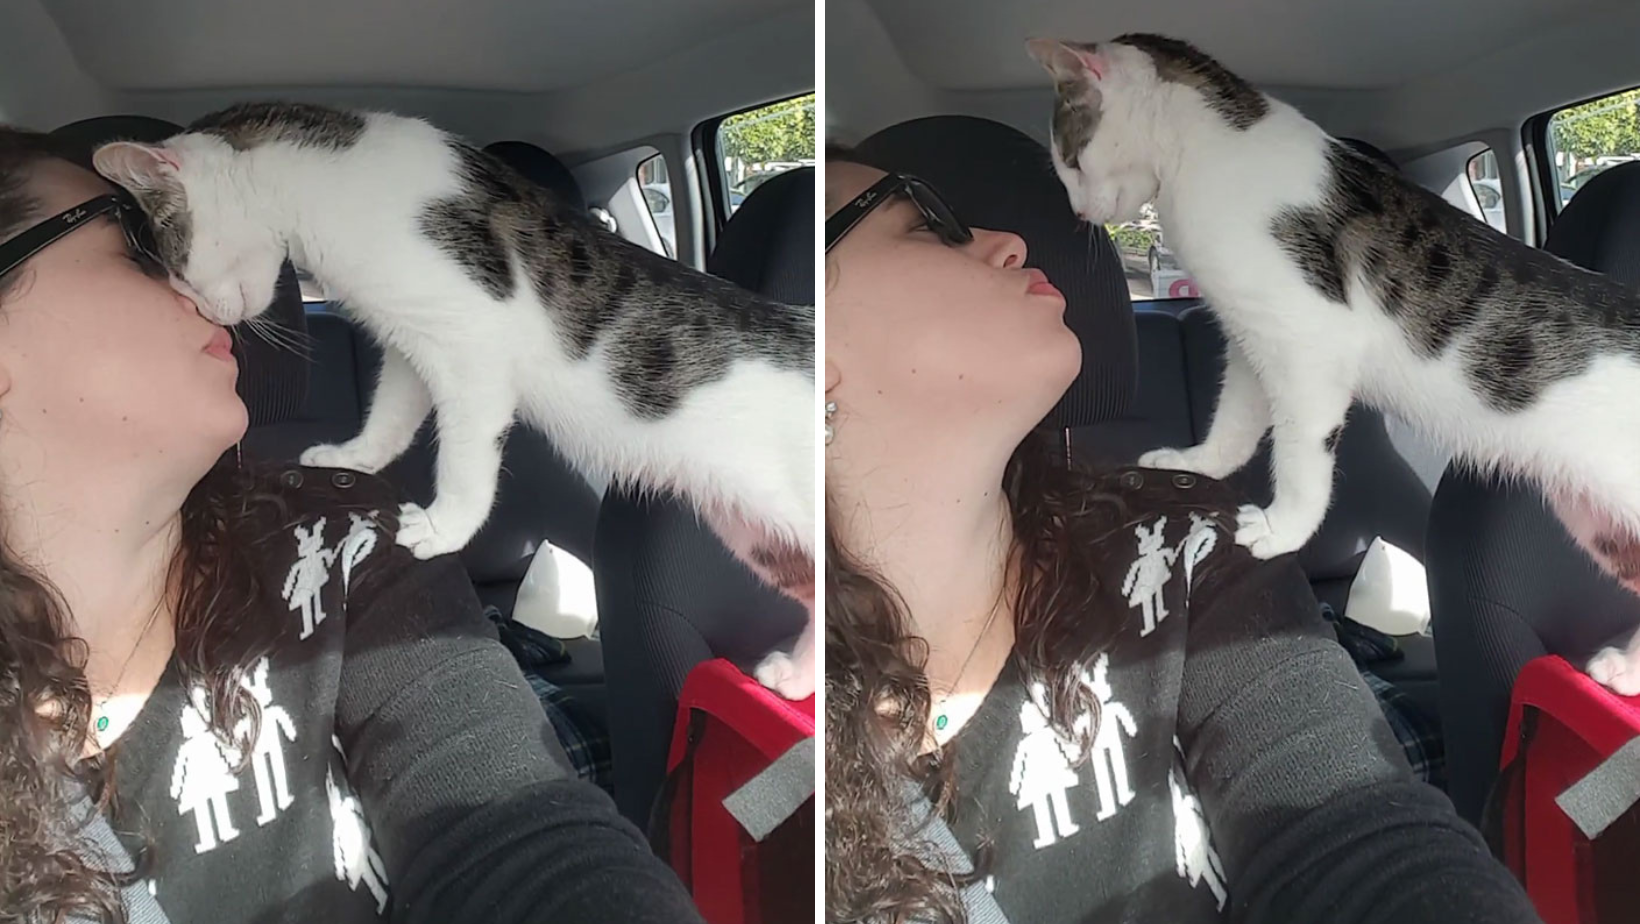 Rescued Hours Before Death Row, This Cat Can't Stop Thanking His Savior